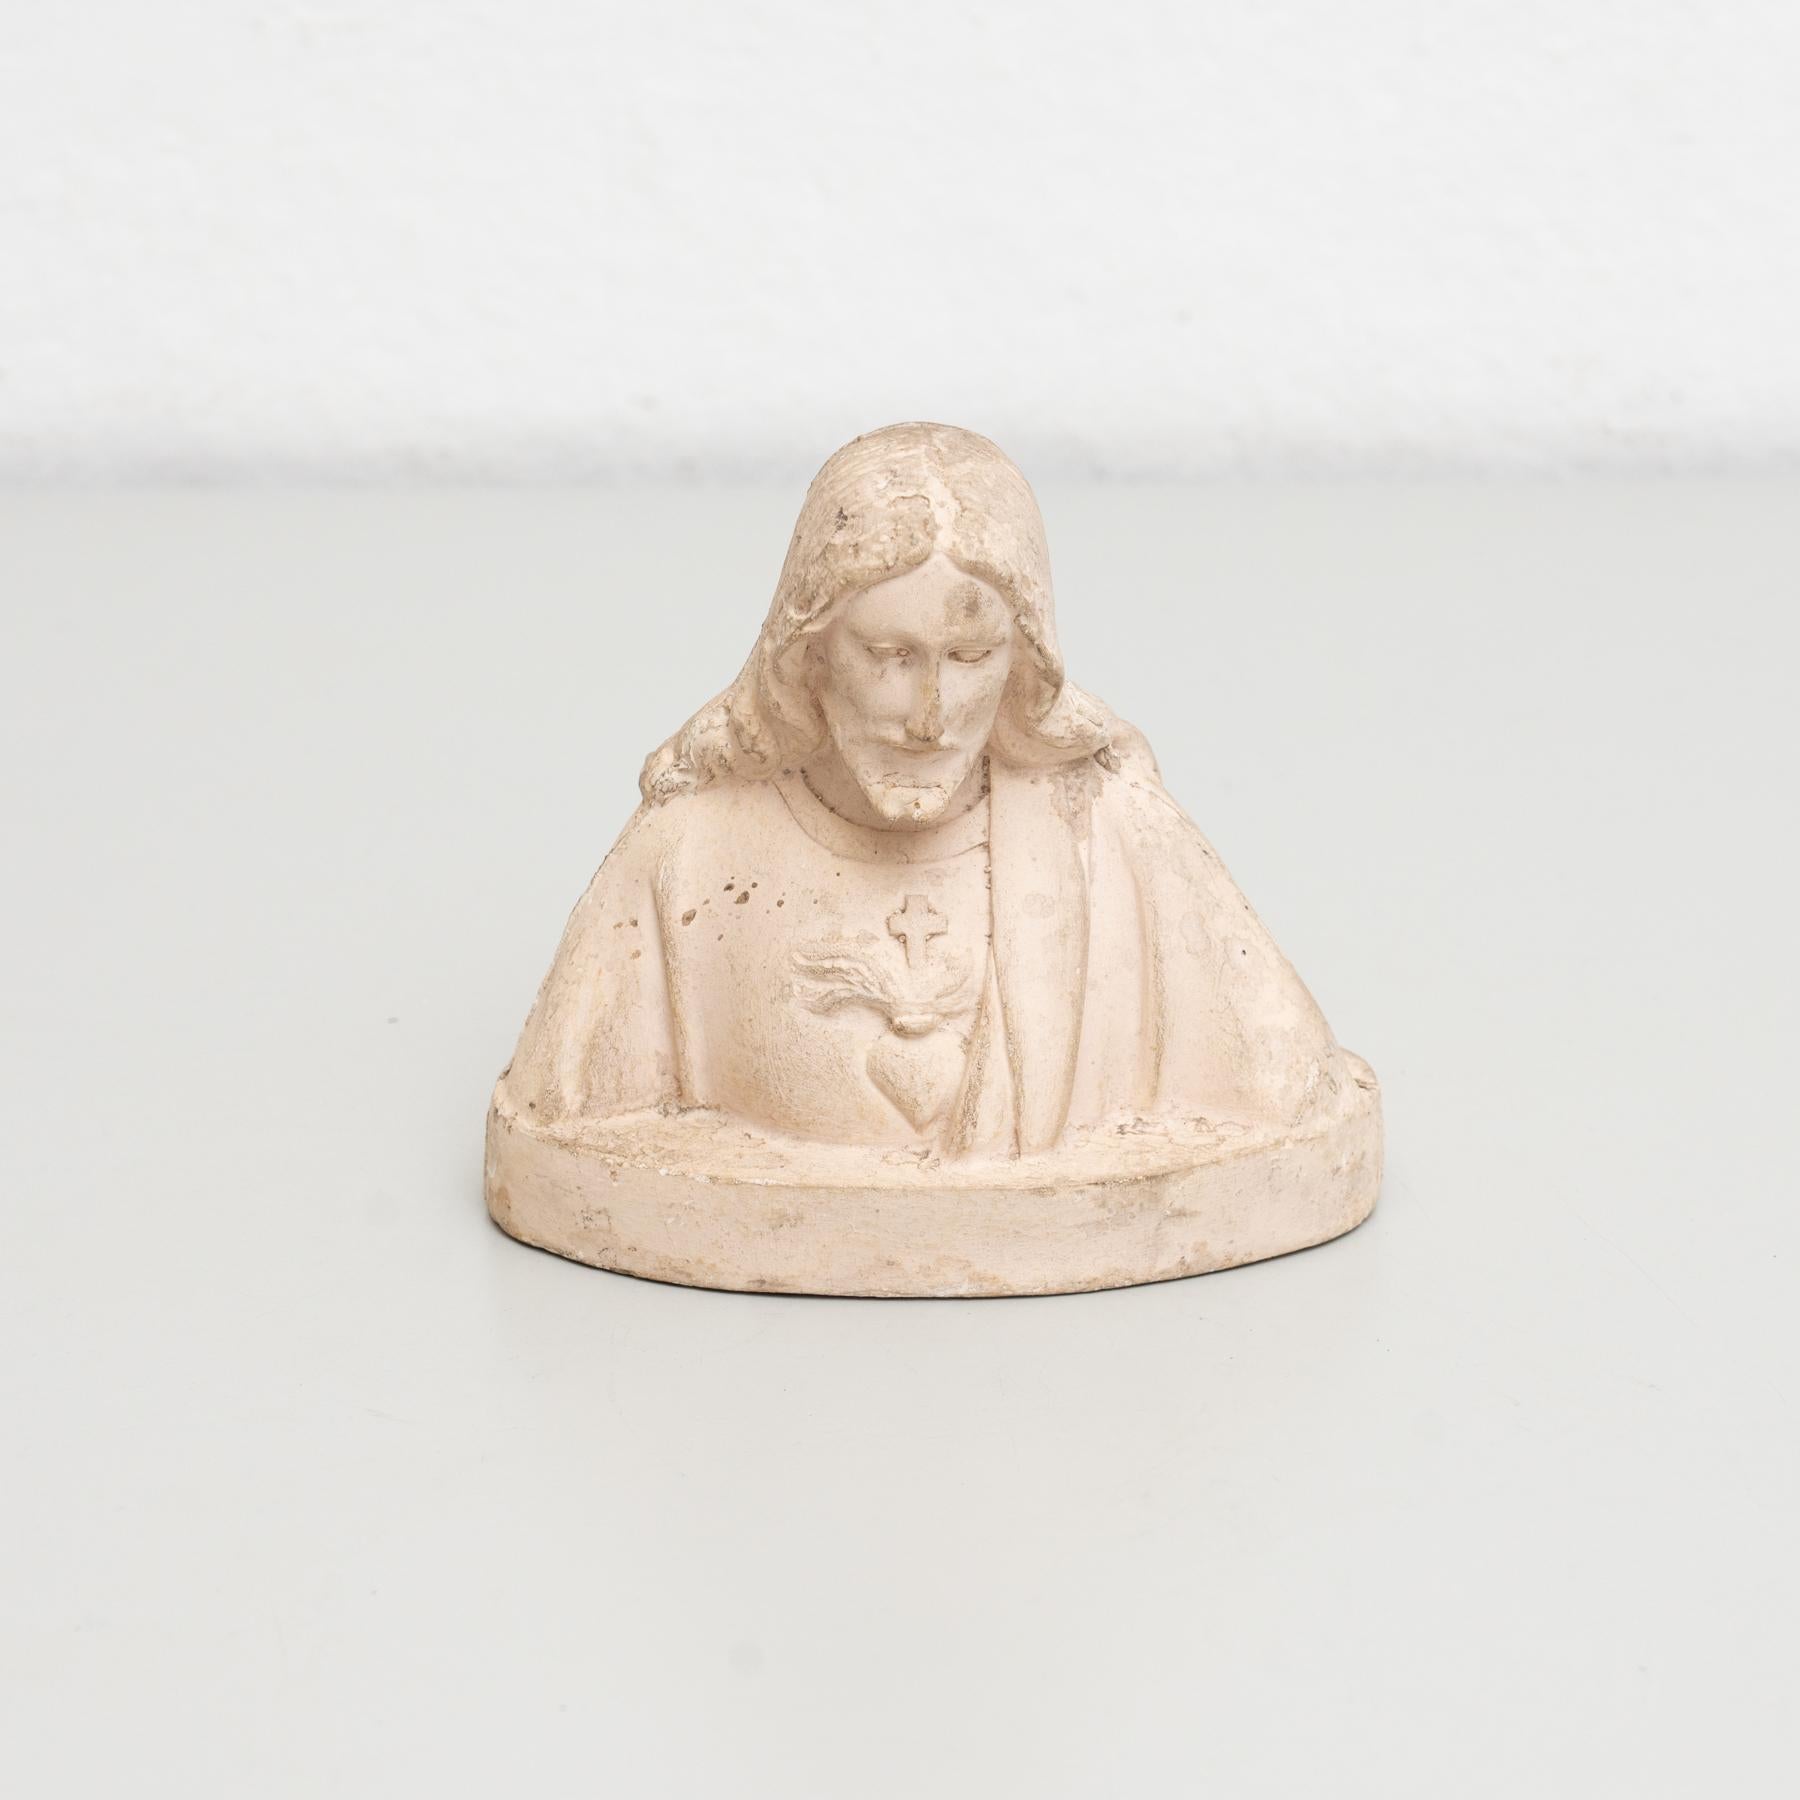 Traditional religious plaster figure of a virgin.

Made in traditional Catalan atelier in Olot, Spain, circa 1950.

In original condition, with minor wear consistent with age and use, preserving a beautiful patina.

Materials:
Plaster.
   